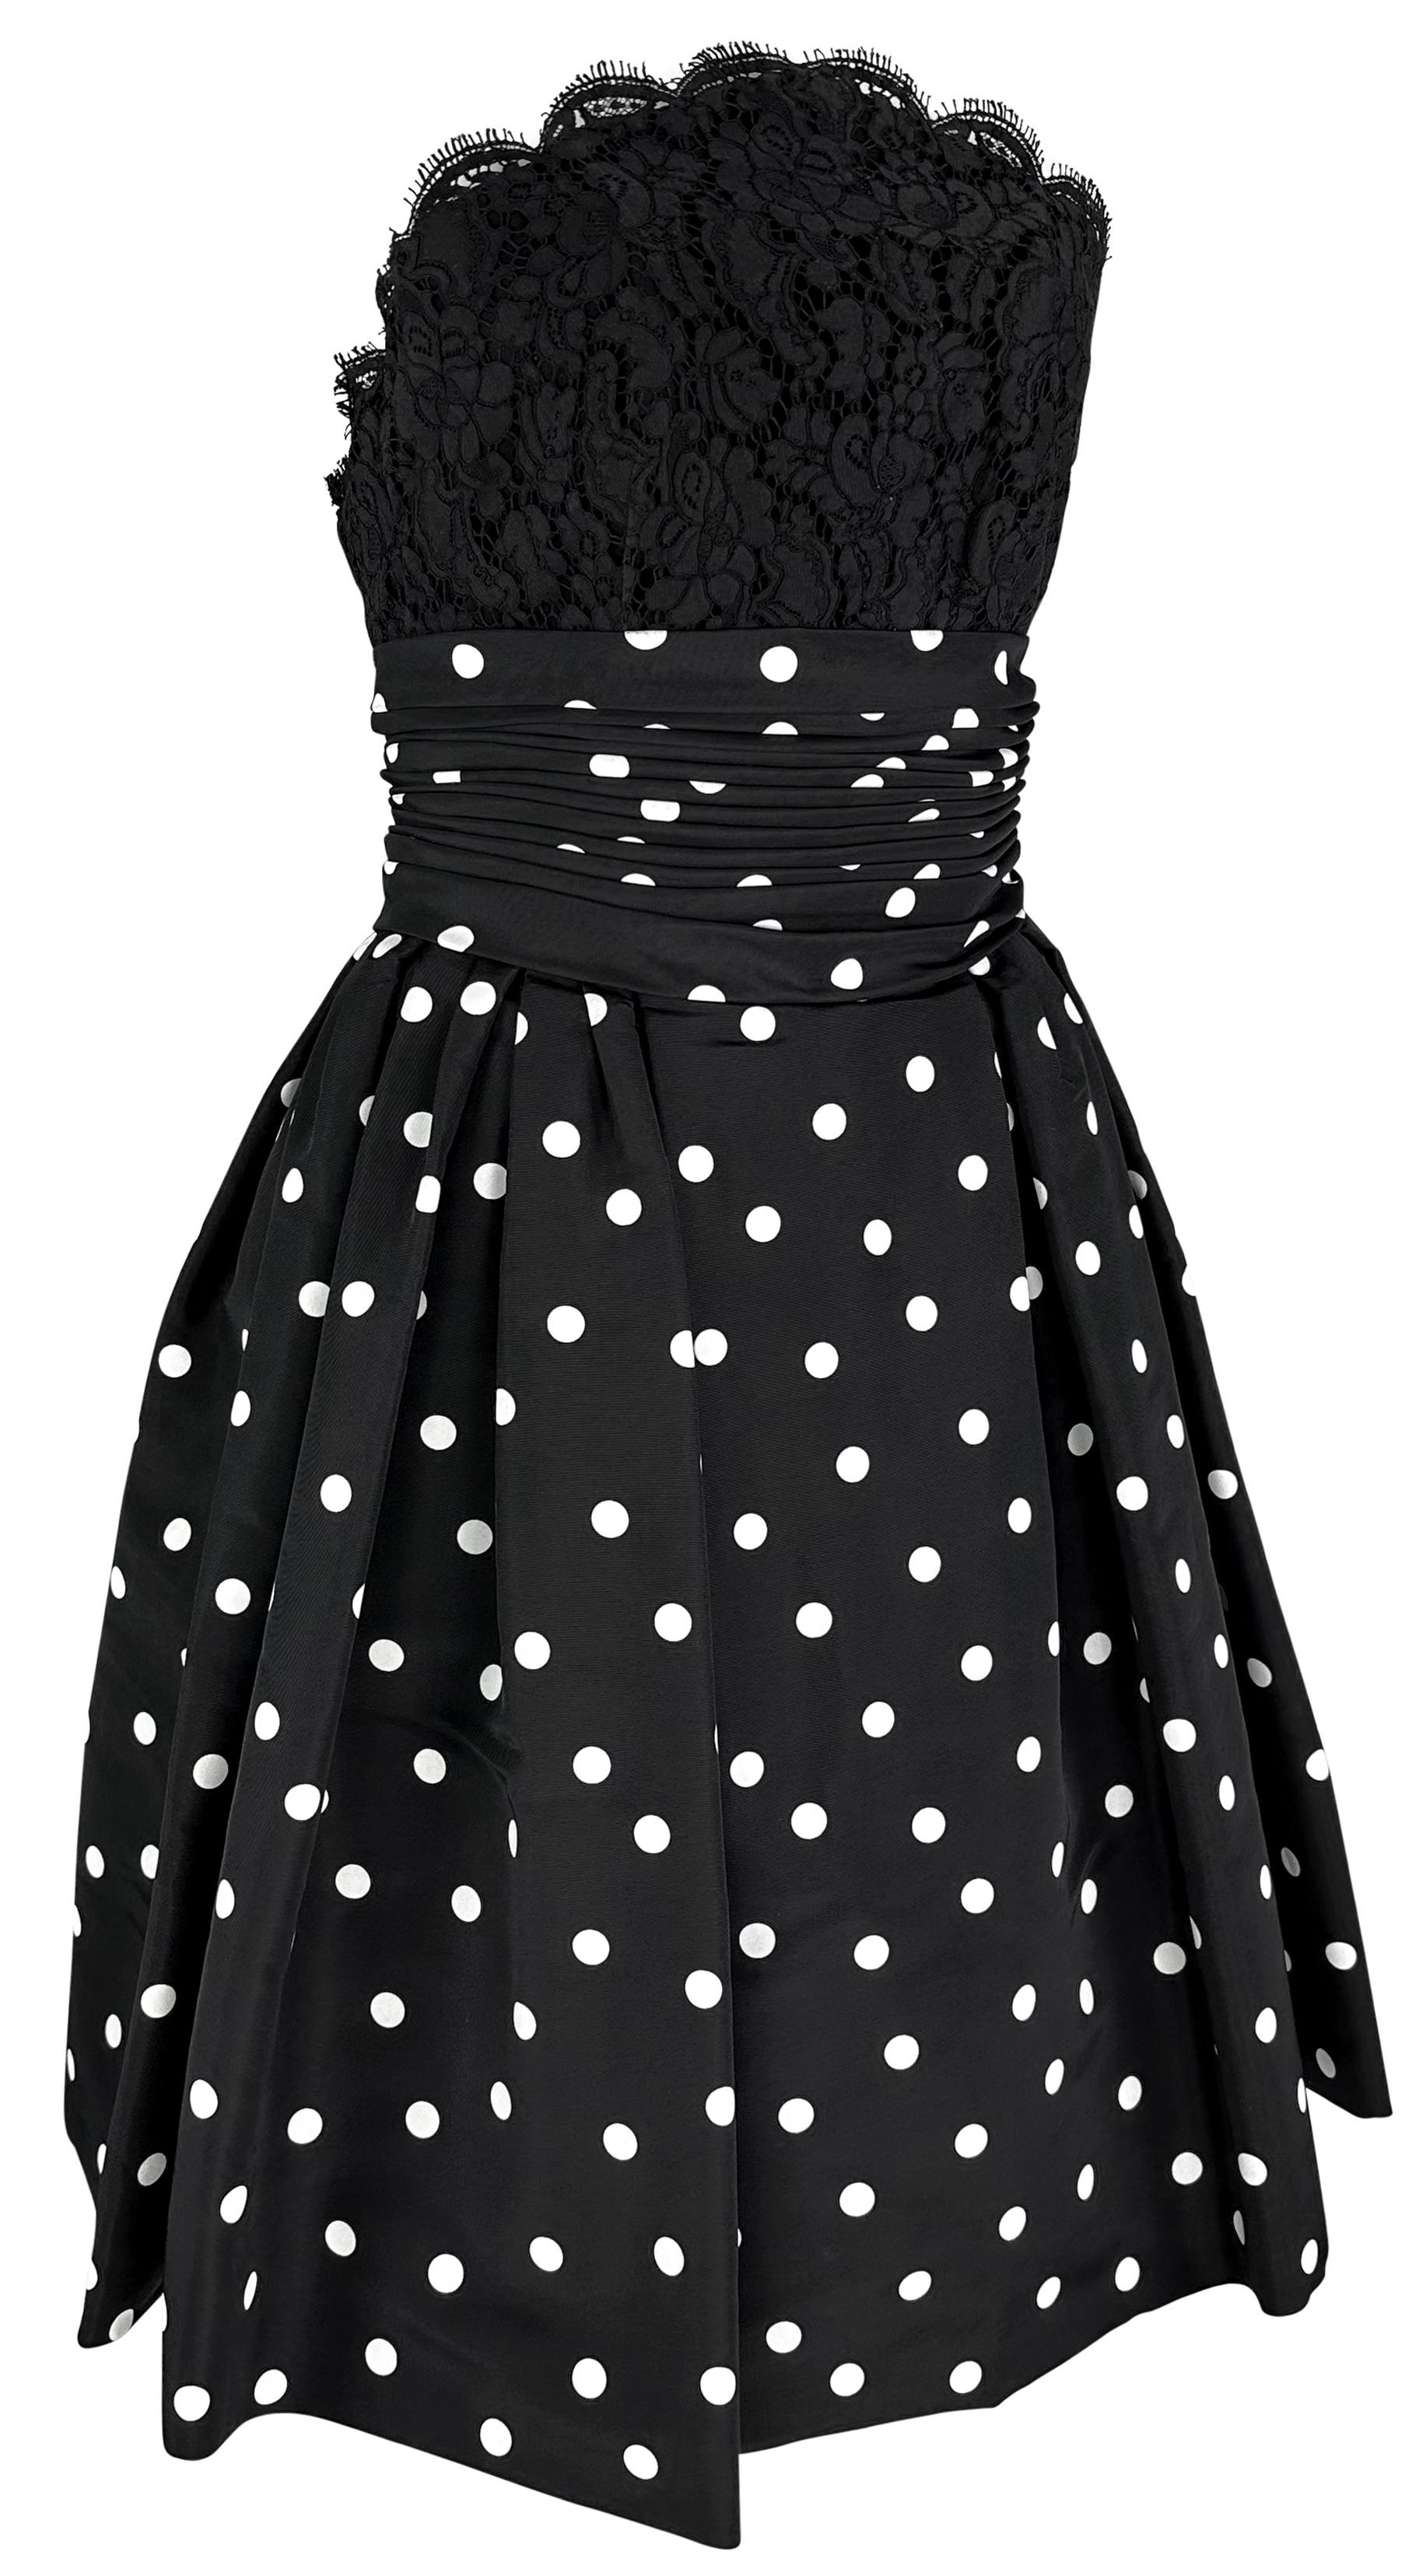  S/S 1988 Chanel by Karl Lagerfeld Runway Polka Dot Lace Strapless Flare Dress For Sale 4